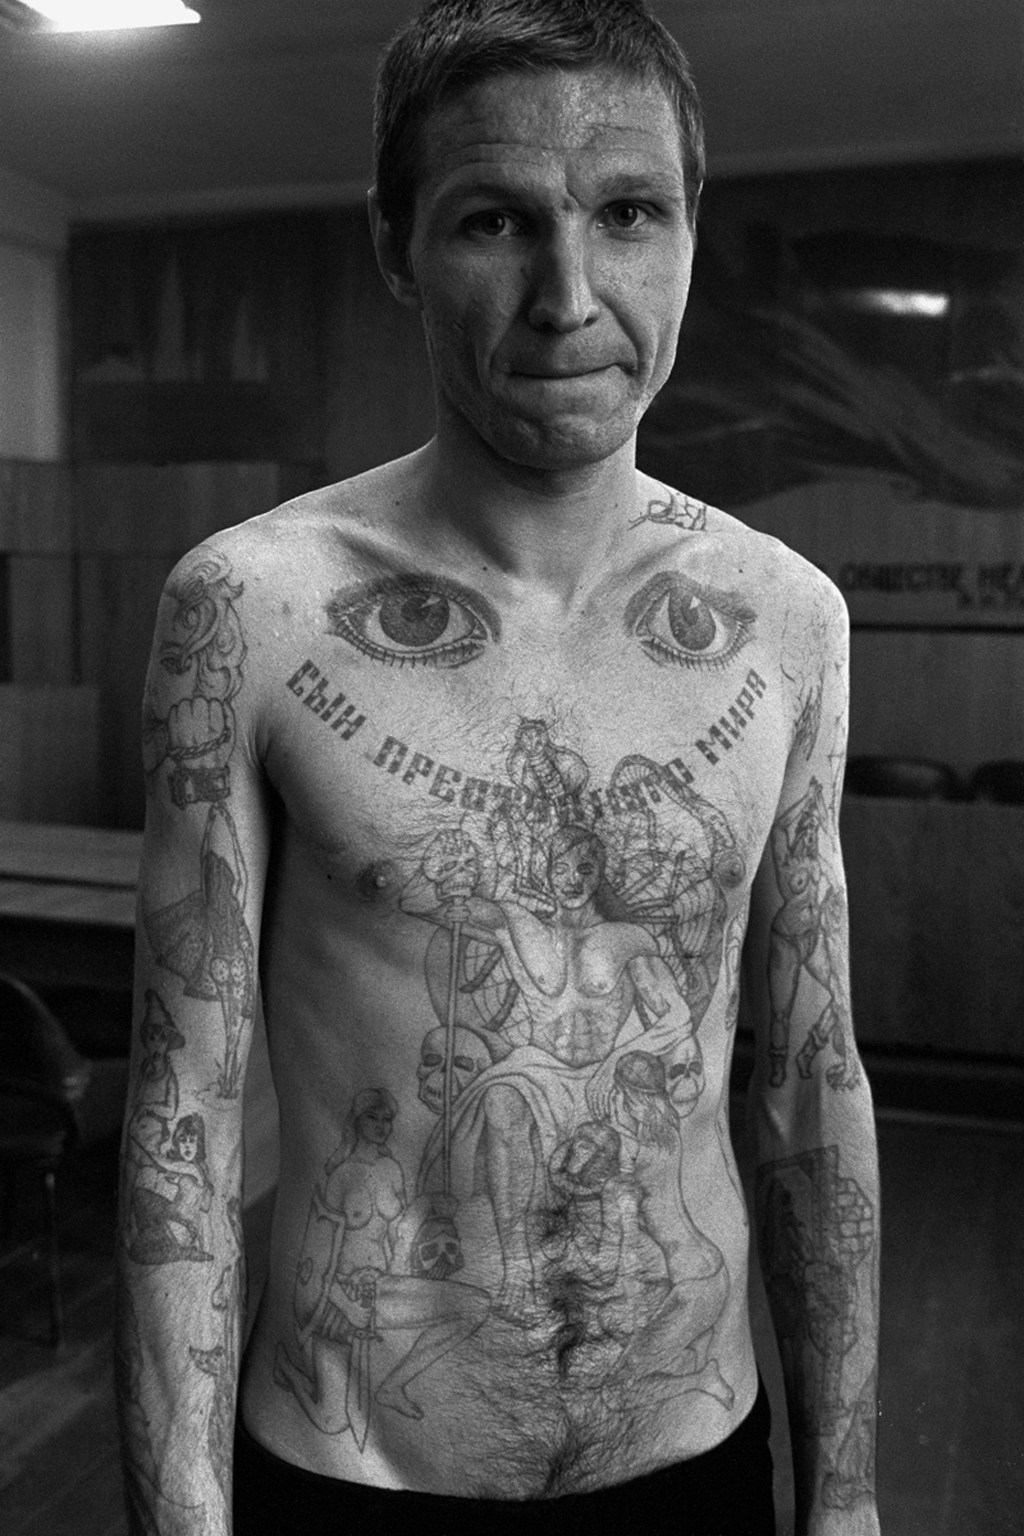 The eyes on the top of the chest signify 'I can see everything' and 'I am watching'. Text across the chest reads 'Son of the criminal world'. This photograph shows tattoos in a combination of old and new styles. In the ‘new’ style a large number of almost random images on the convict’s body. In the ‘traditional’ style there is one large central tattoo on the chest, filling as much space as possible.